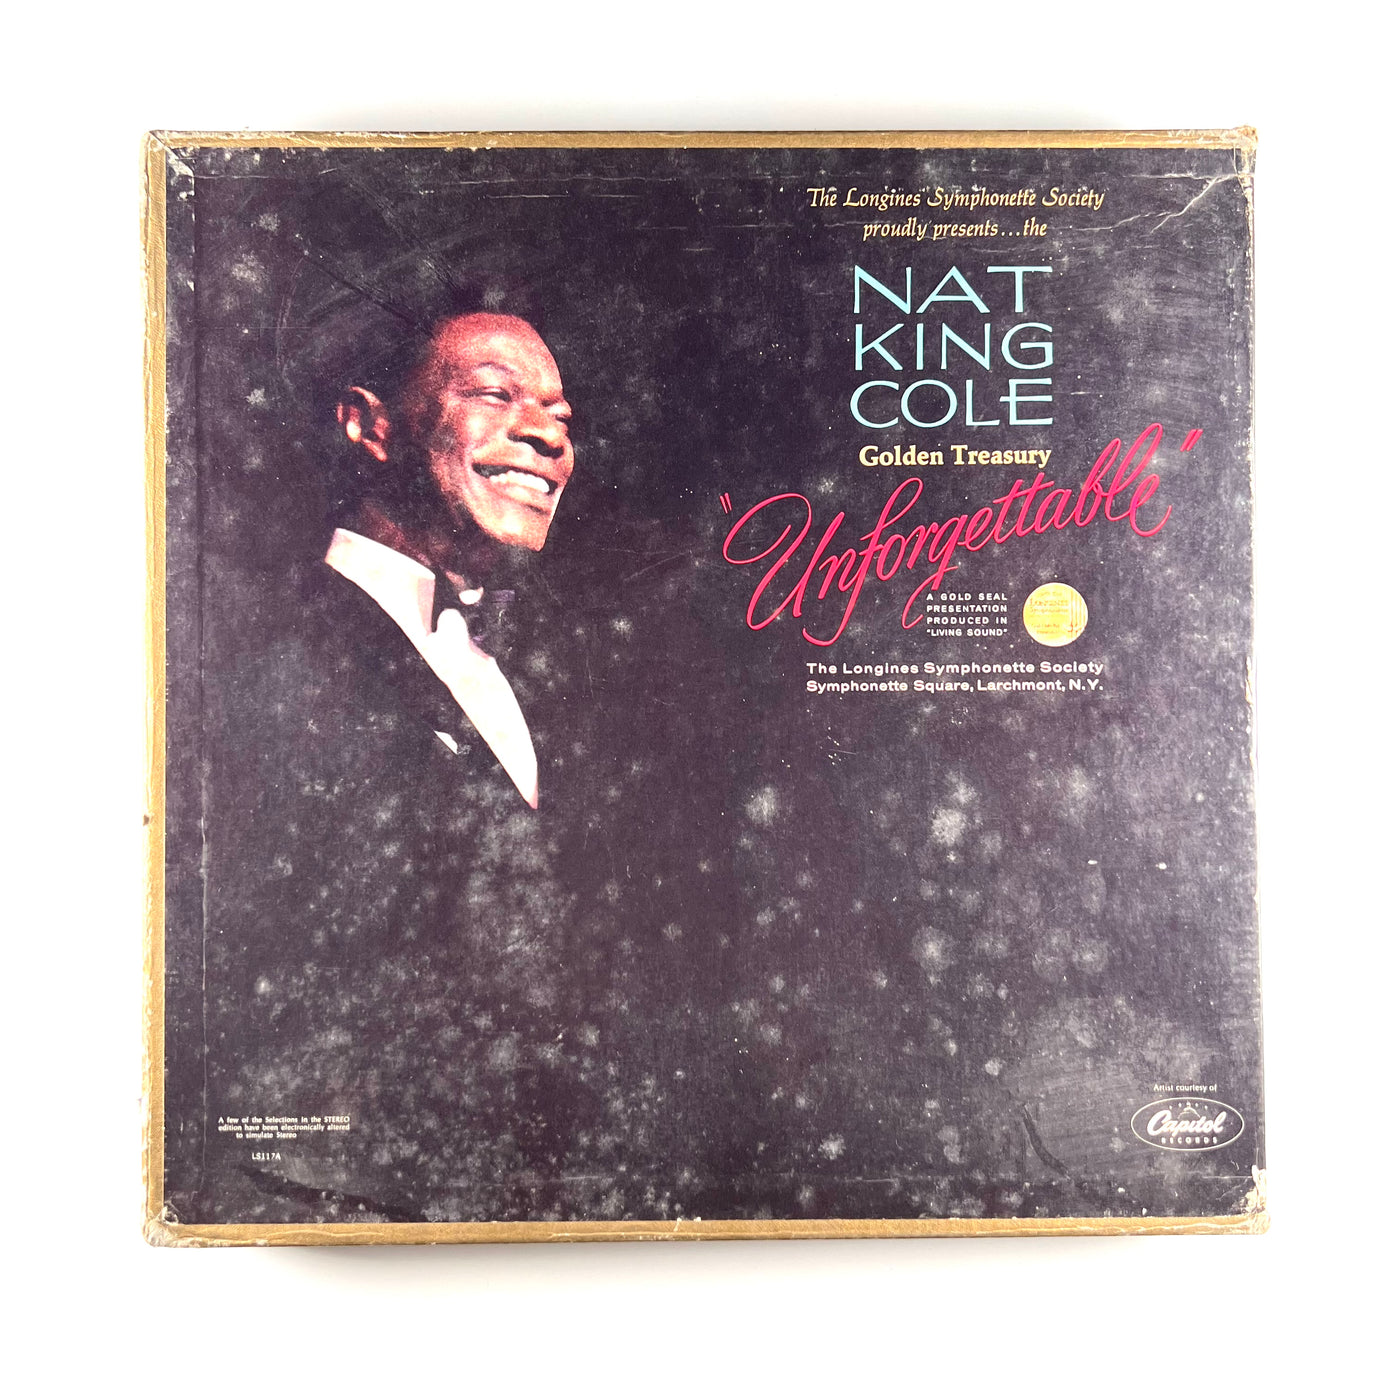 Nat King Cole - Nat King Cole Golden Treasury "Unforgettable"